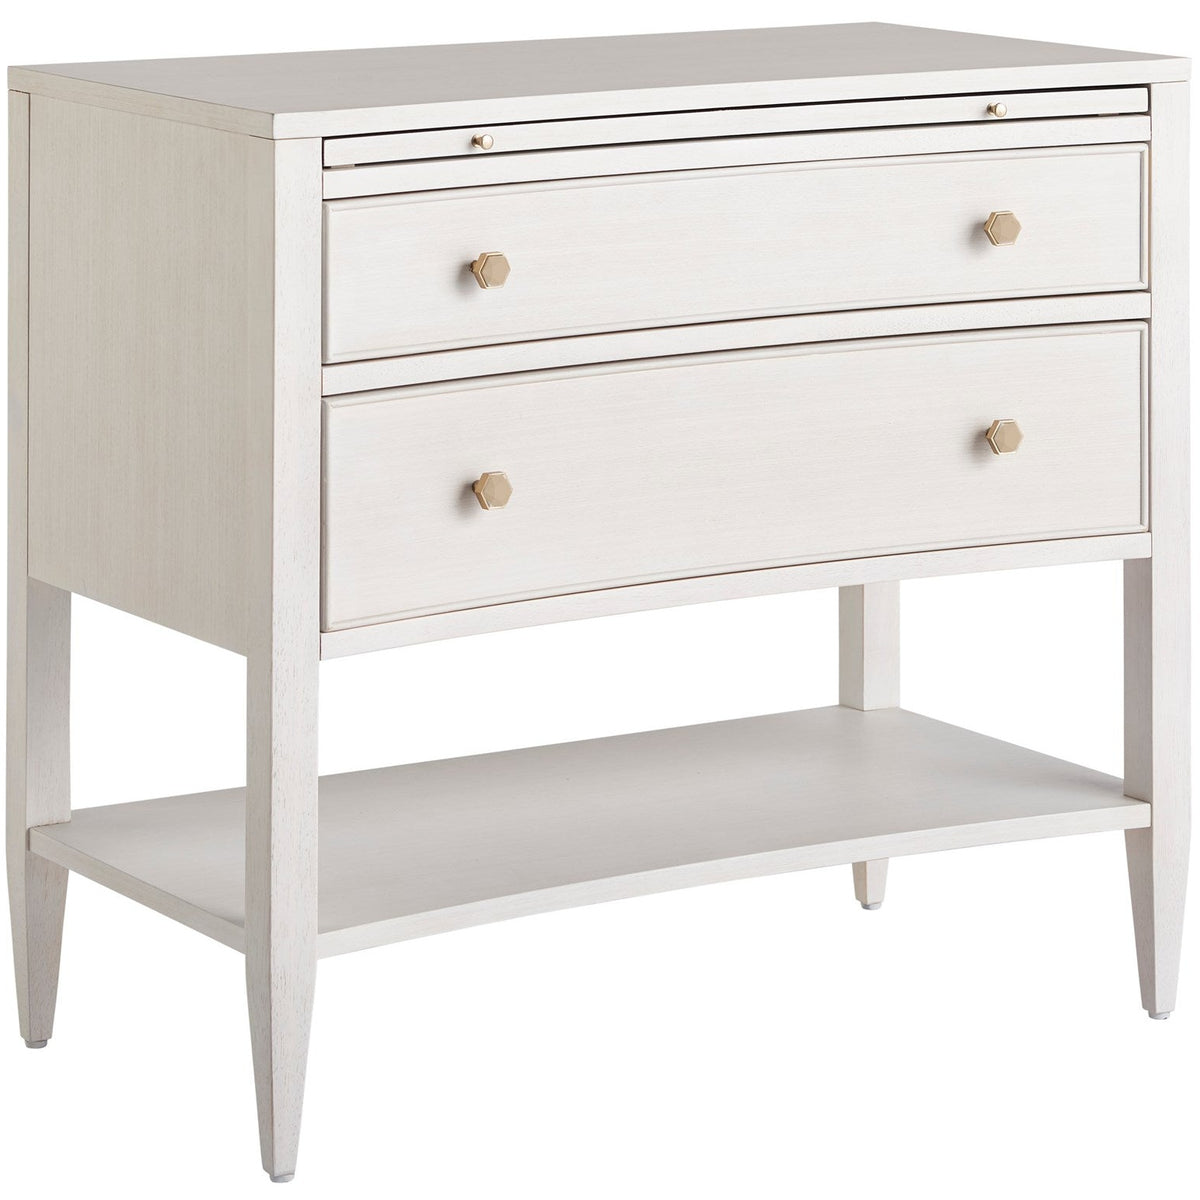 Chelsea Nightstand - Be Bold Furniture